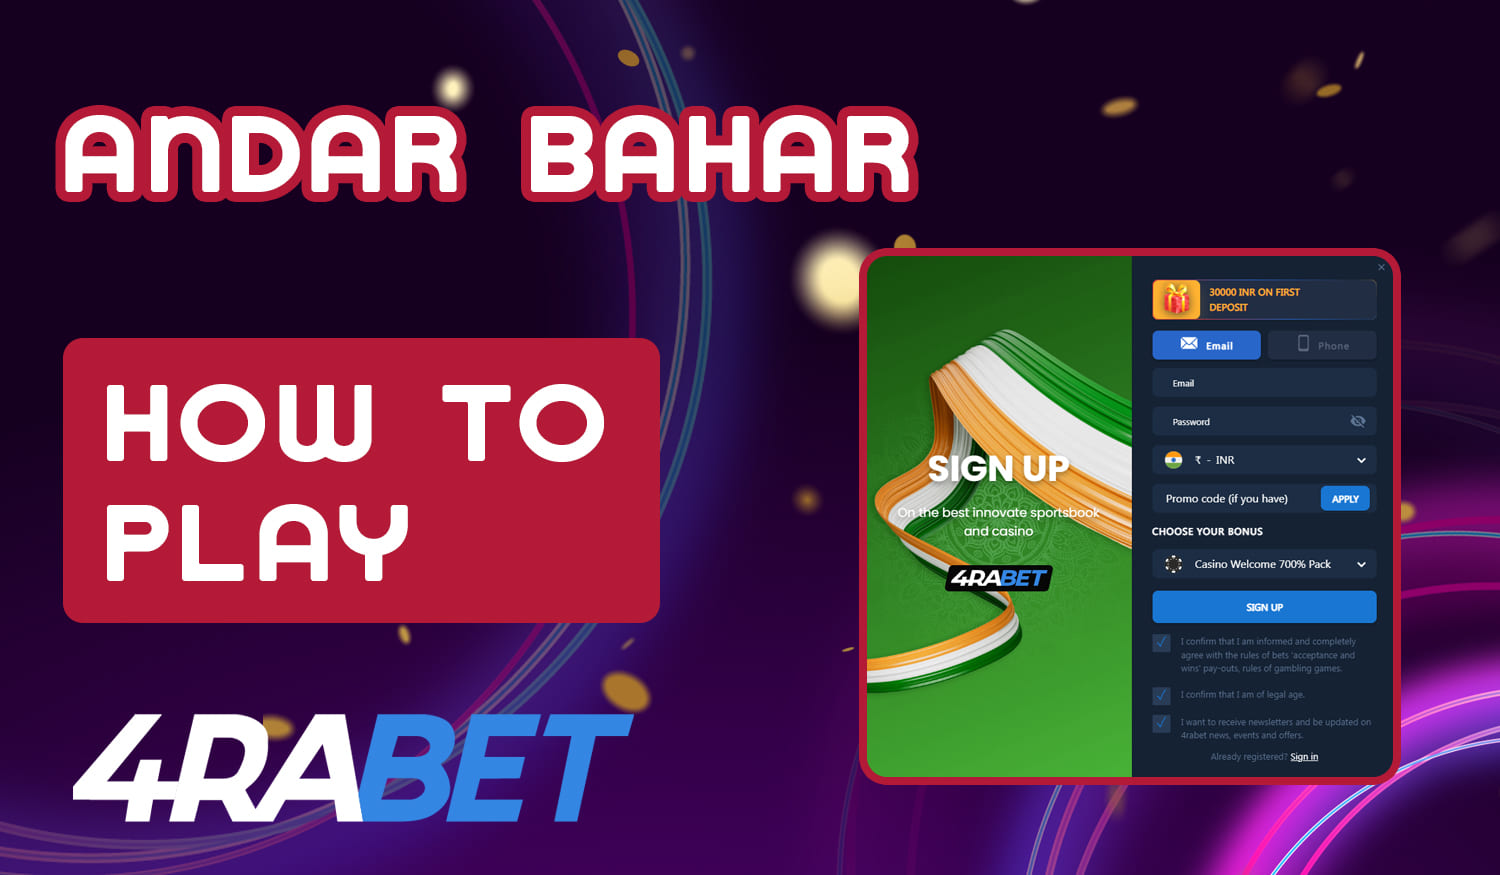 How to register and start playing Andar Bahar on 4raBet